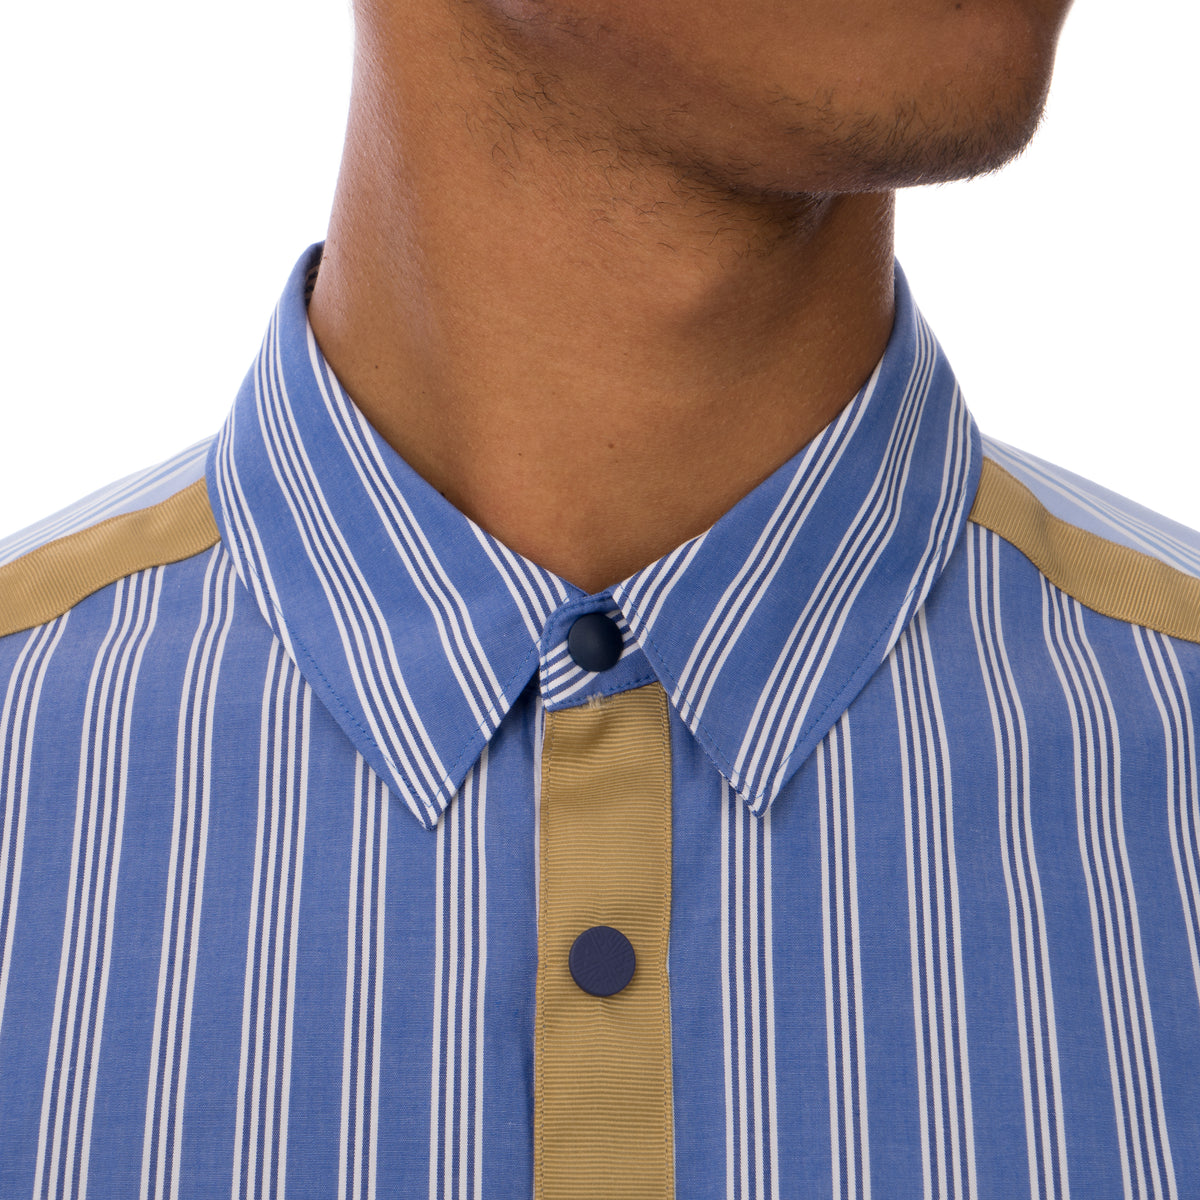 White Mountaineering | Striped Broad Taped Shirt Blue - Concrete